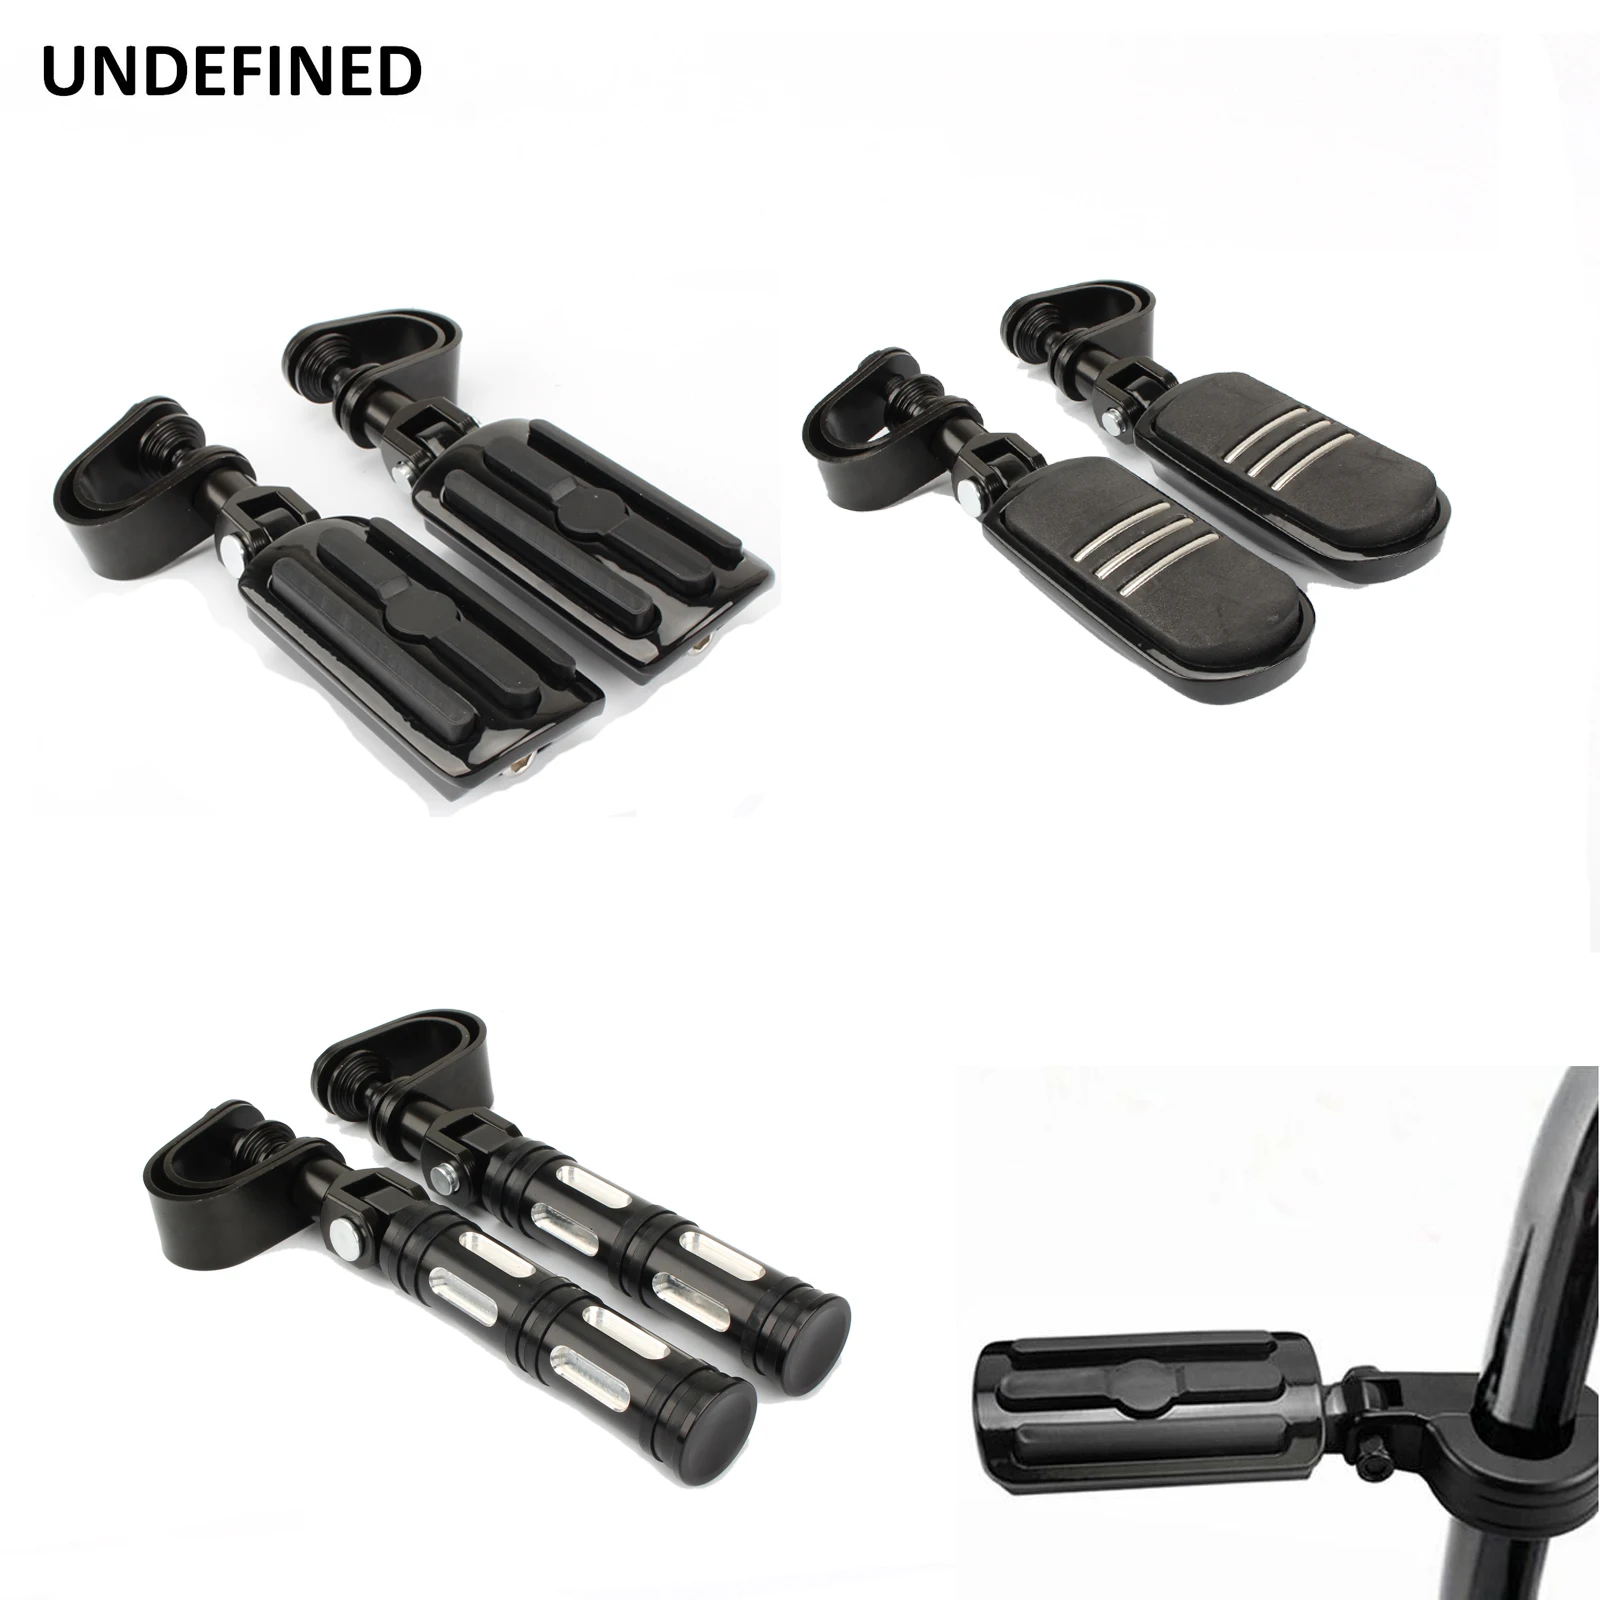 

1" 1-1/4"Highway Pegs Footrest Adjustable Motorcycle Footpegs Engine Guard Mount For Harley Touring Road Glide For Yamaha XV950R